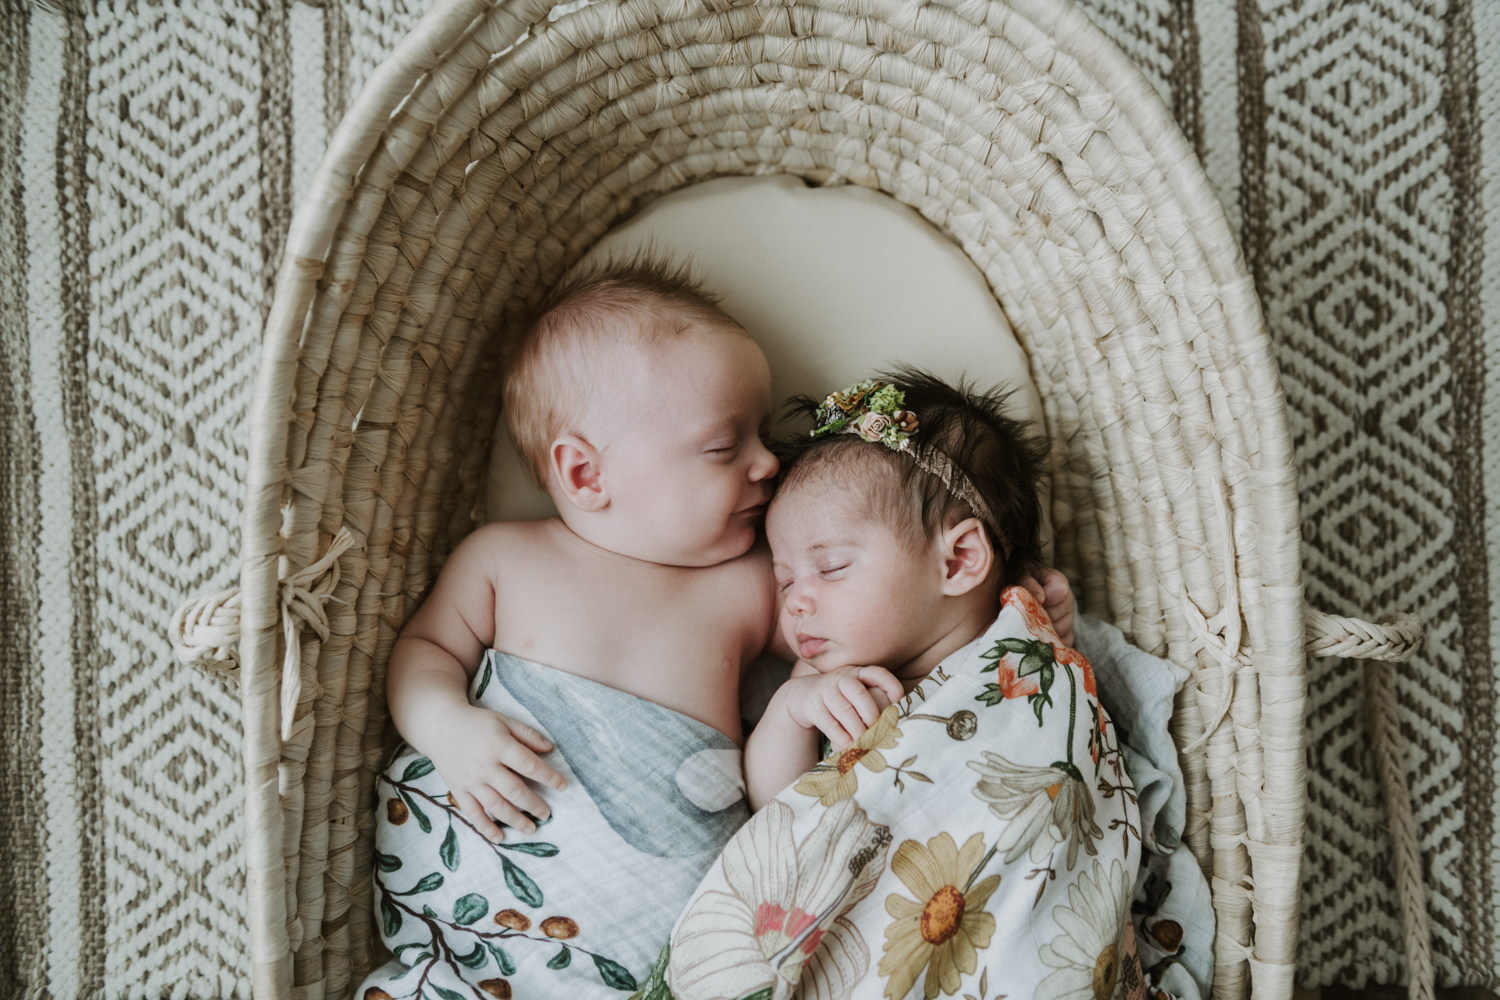 Newborn baby girl and boy wrapped in blankets while sleeping in bassinet